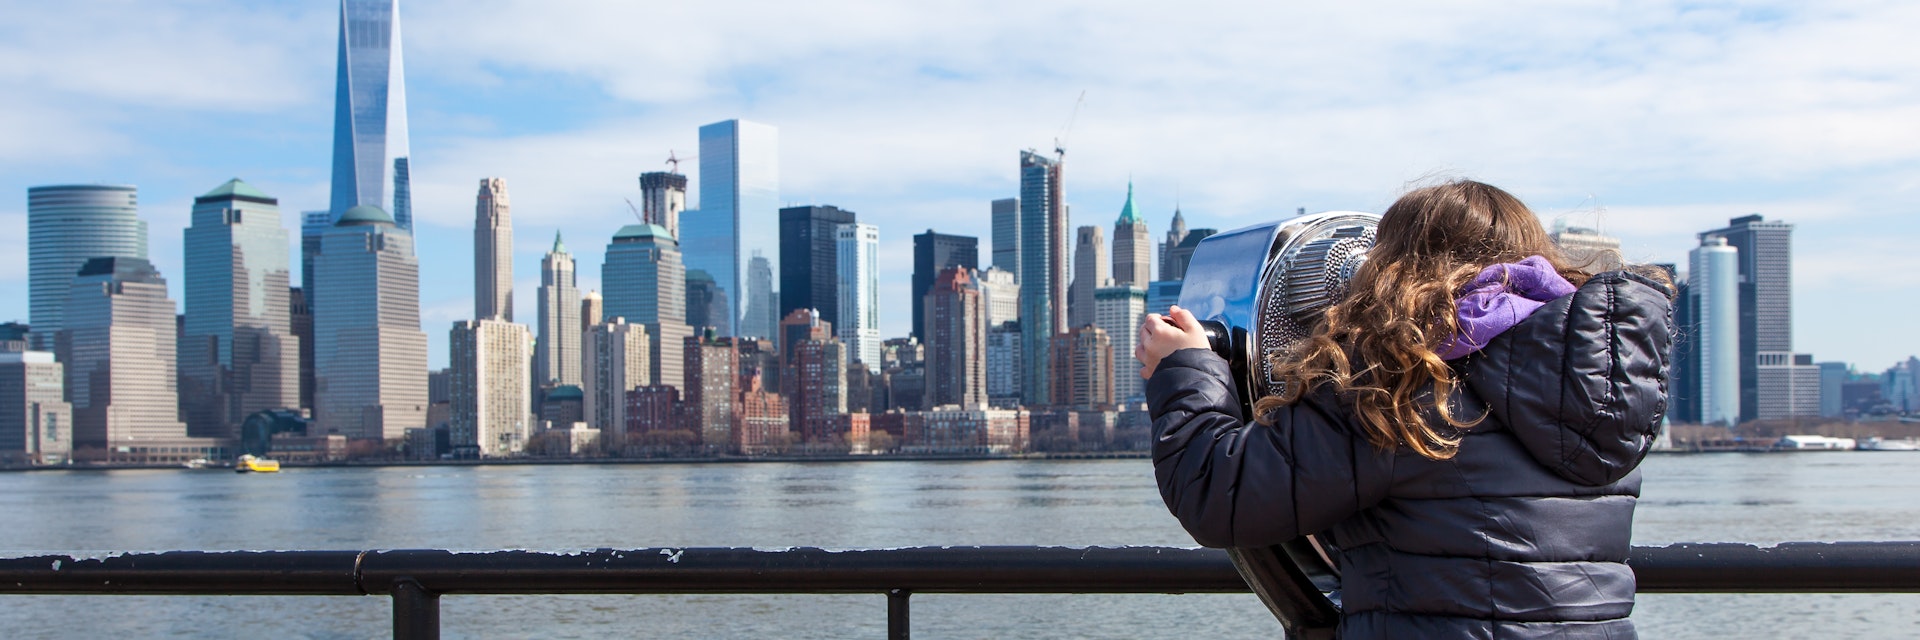 JERSEY CITY, NJ - MARCH 6: A little girl looks at the Manhattan skyline through binoculars at Liberty State Park on March 6, 2016.